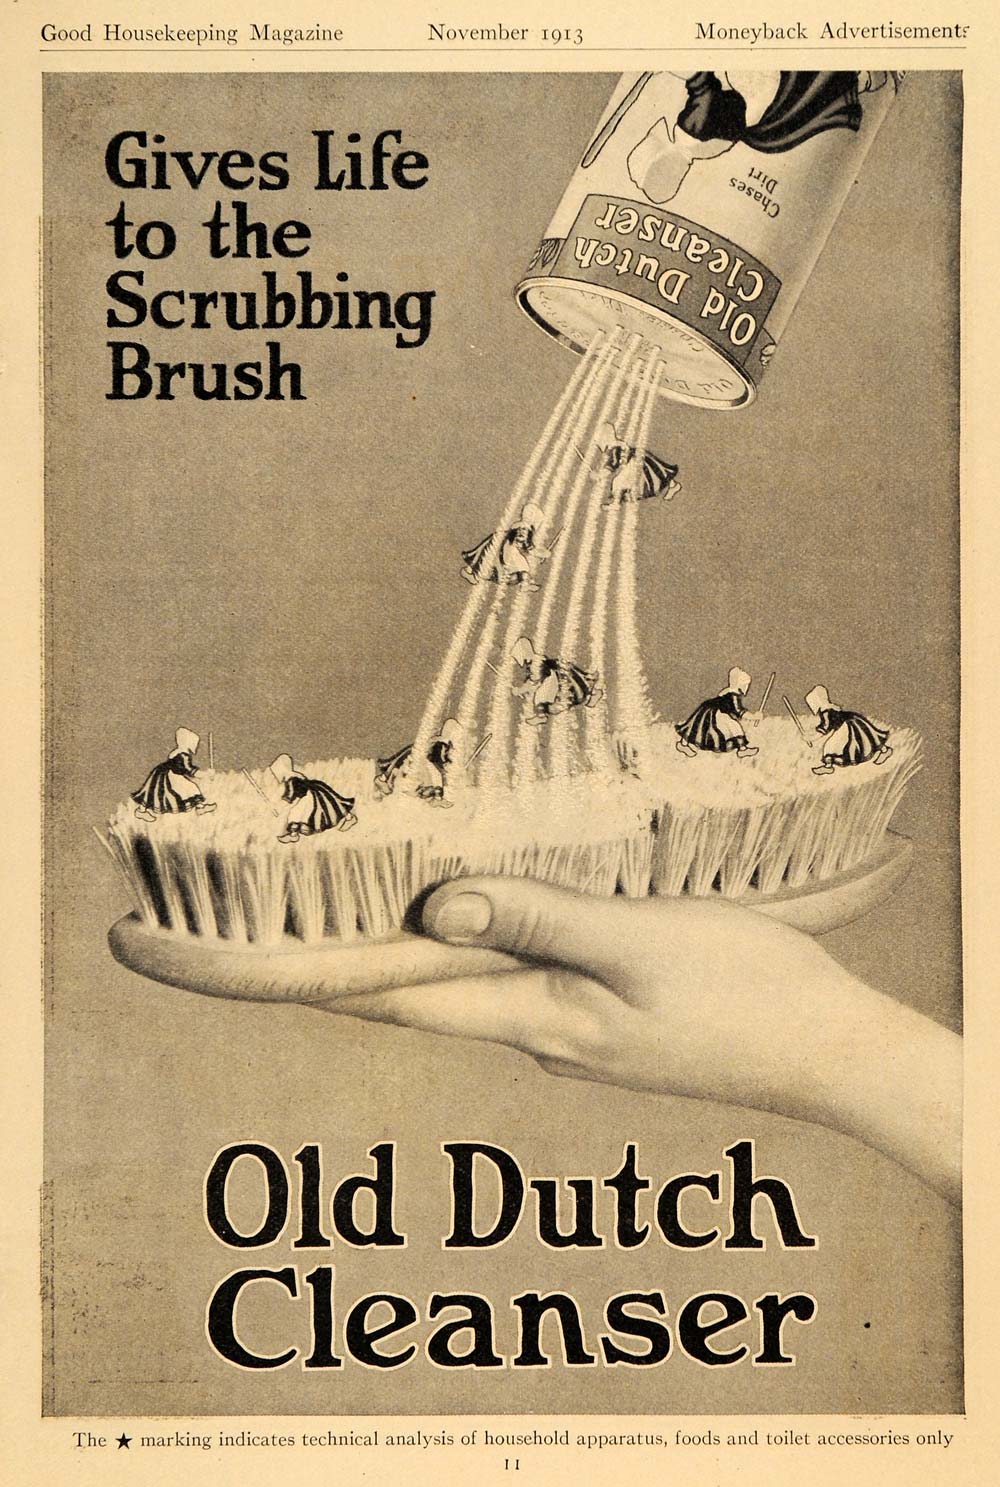 1913 Ad Cudahy Packing Co. Old Dutch Cleanser Brush - ORIGINAL ADVERTISING GH3